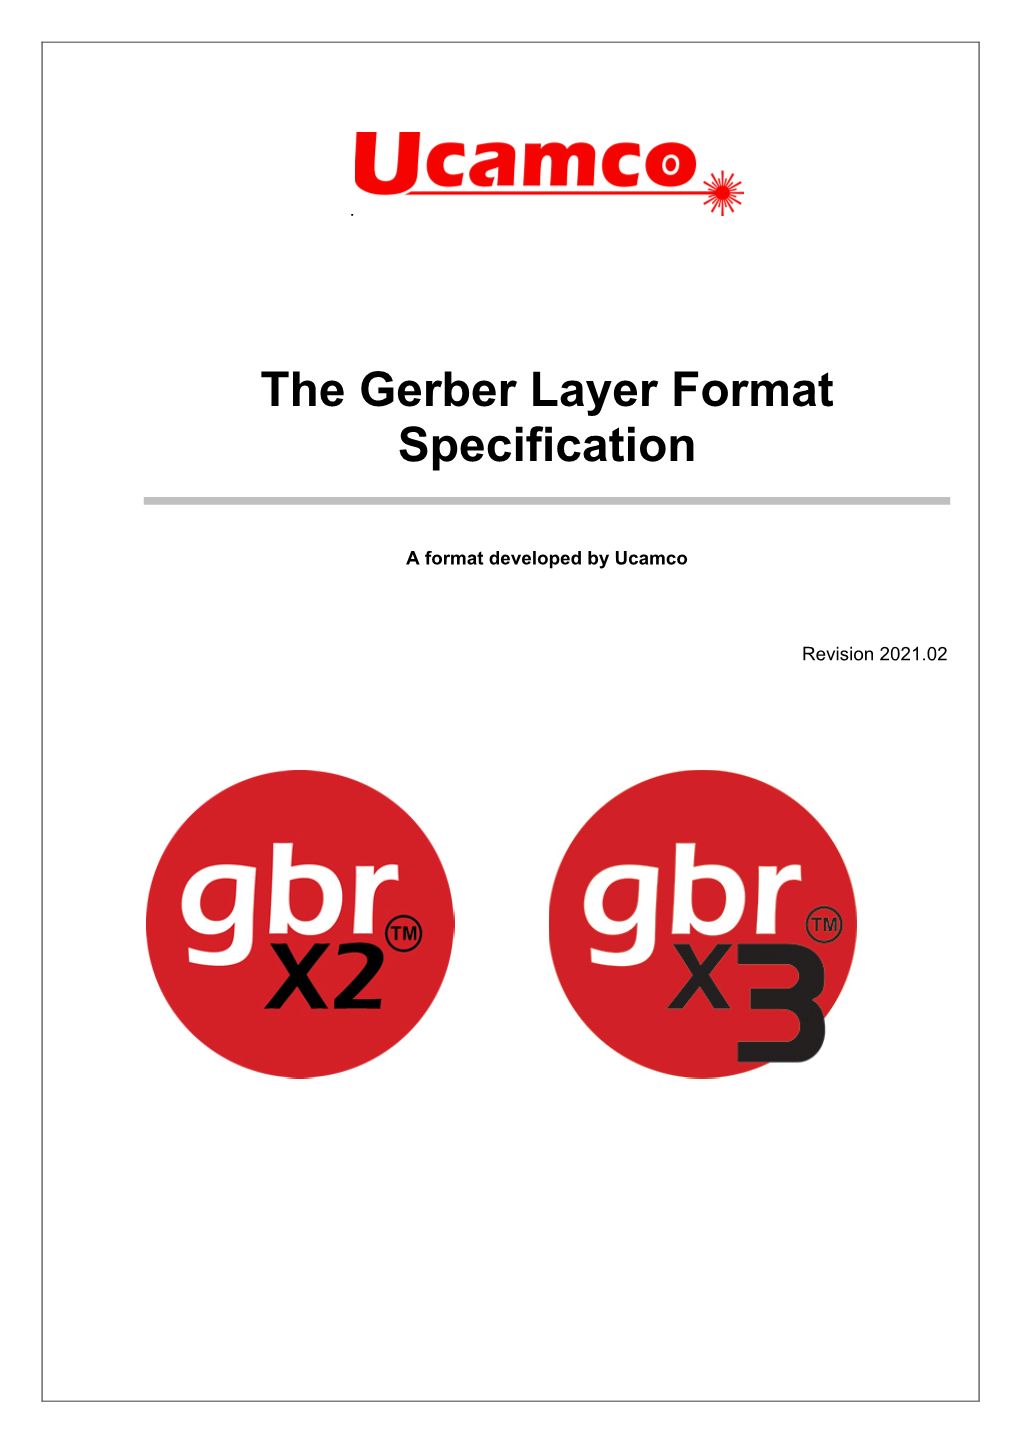 The Gerber Layer Format Specification 2021.02